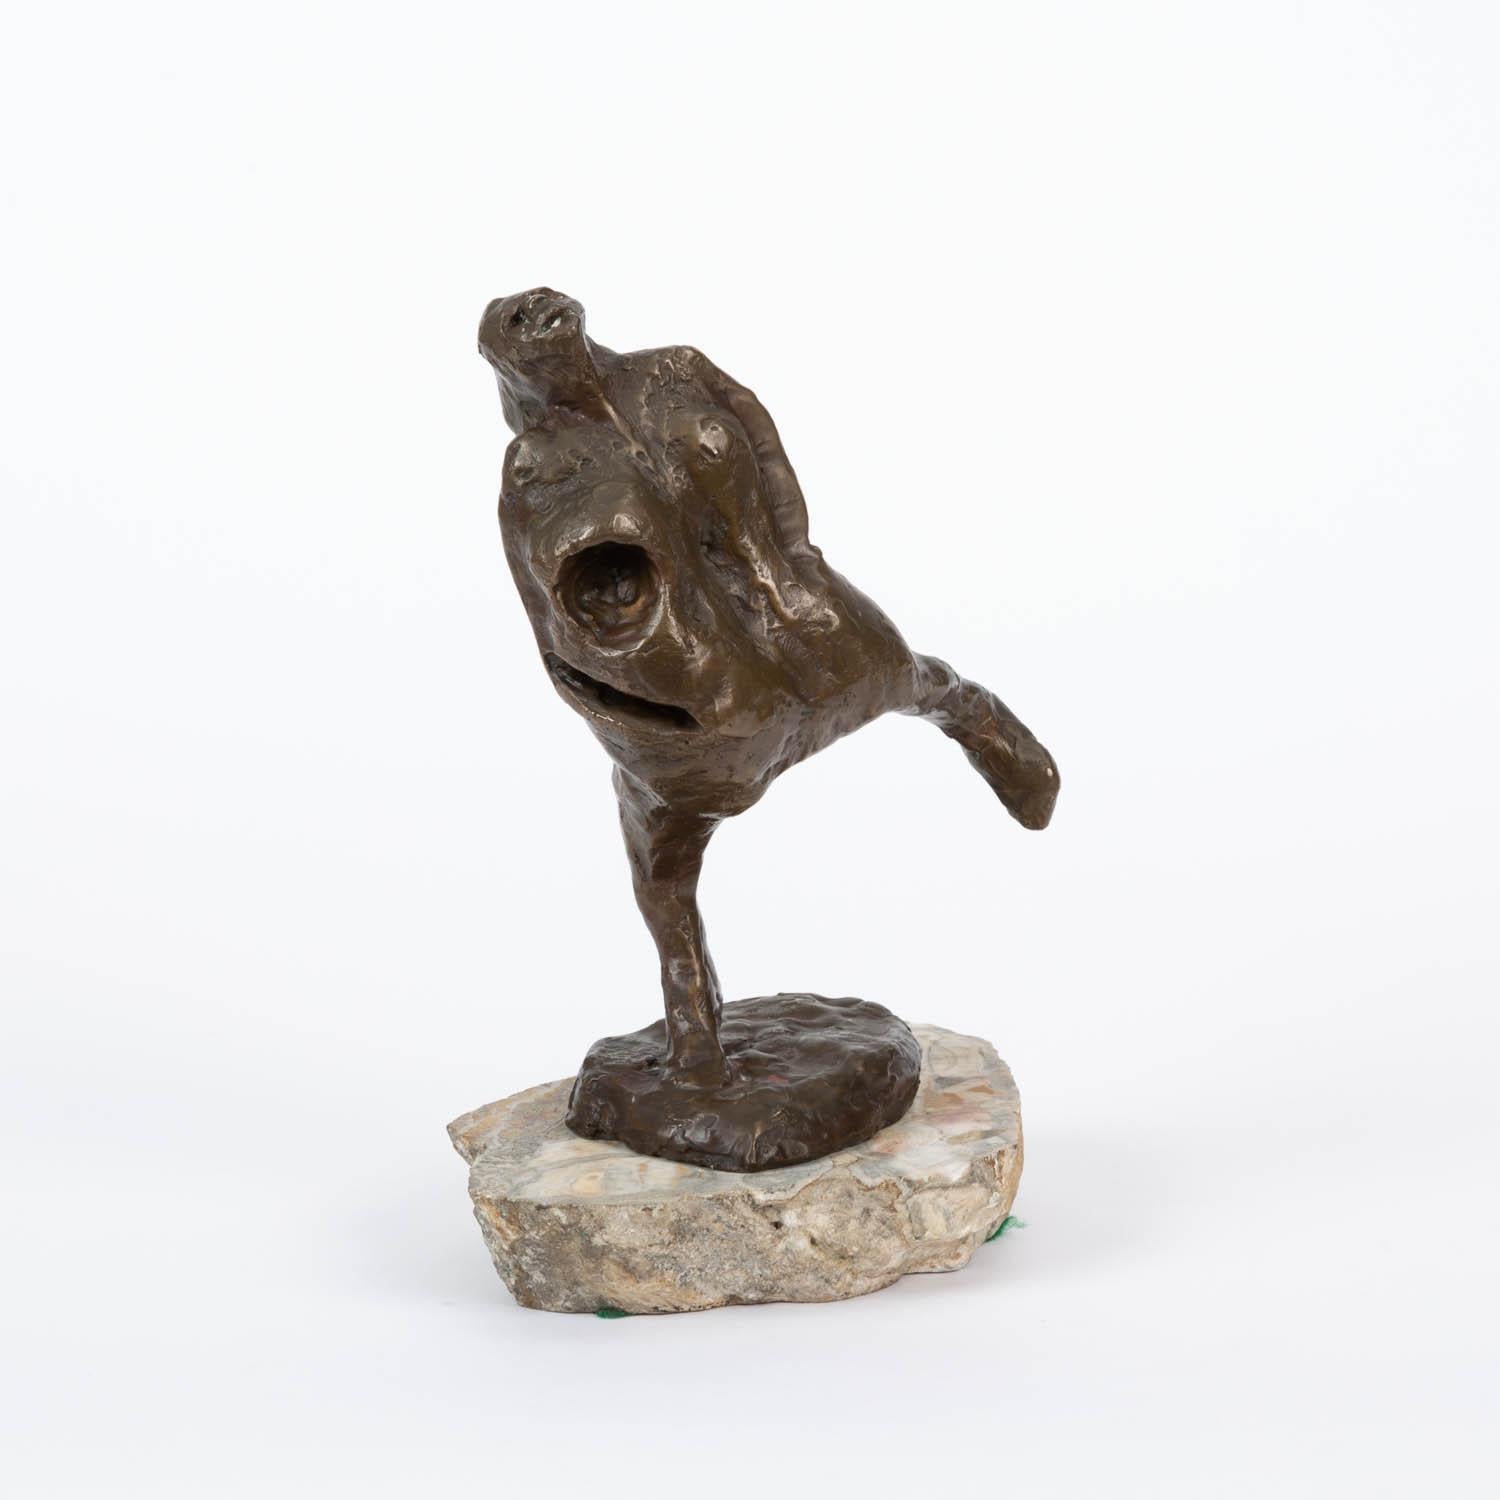 Cast bronze sculpture of dancing woman mounted on stone. Stamped 